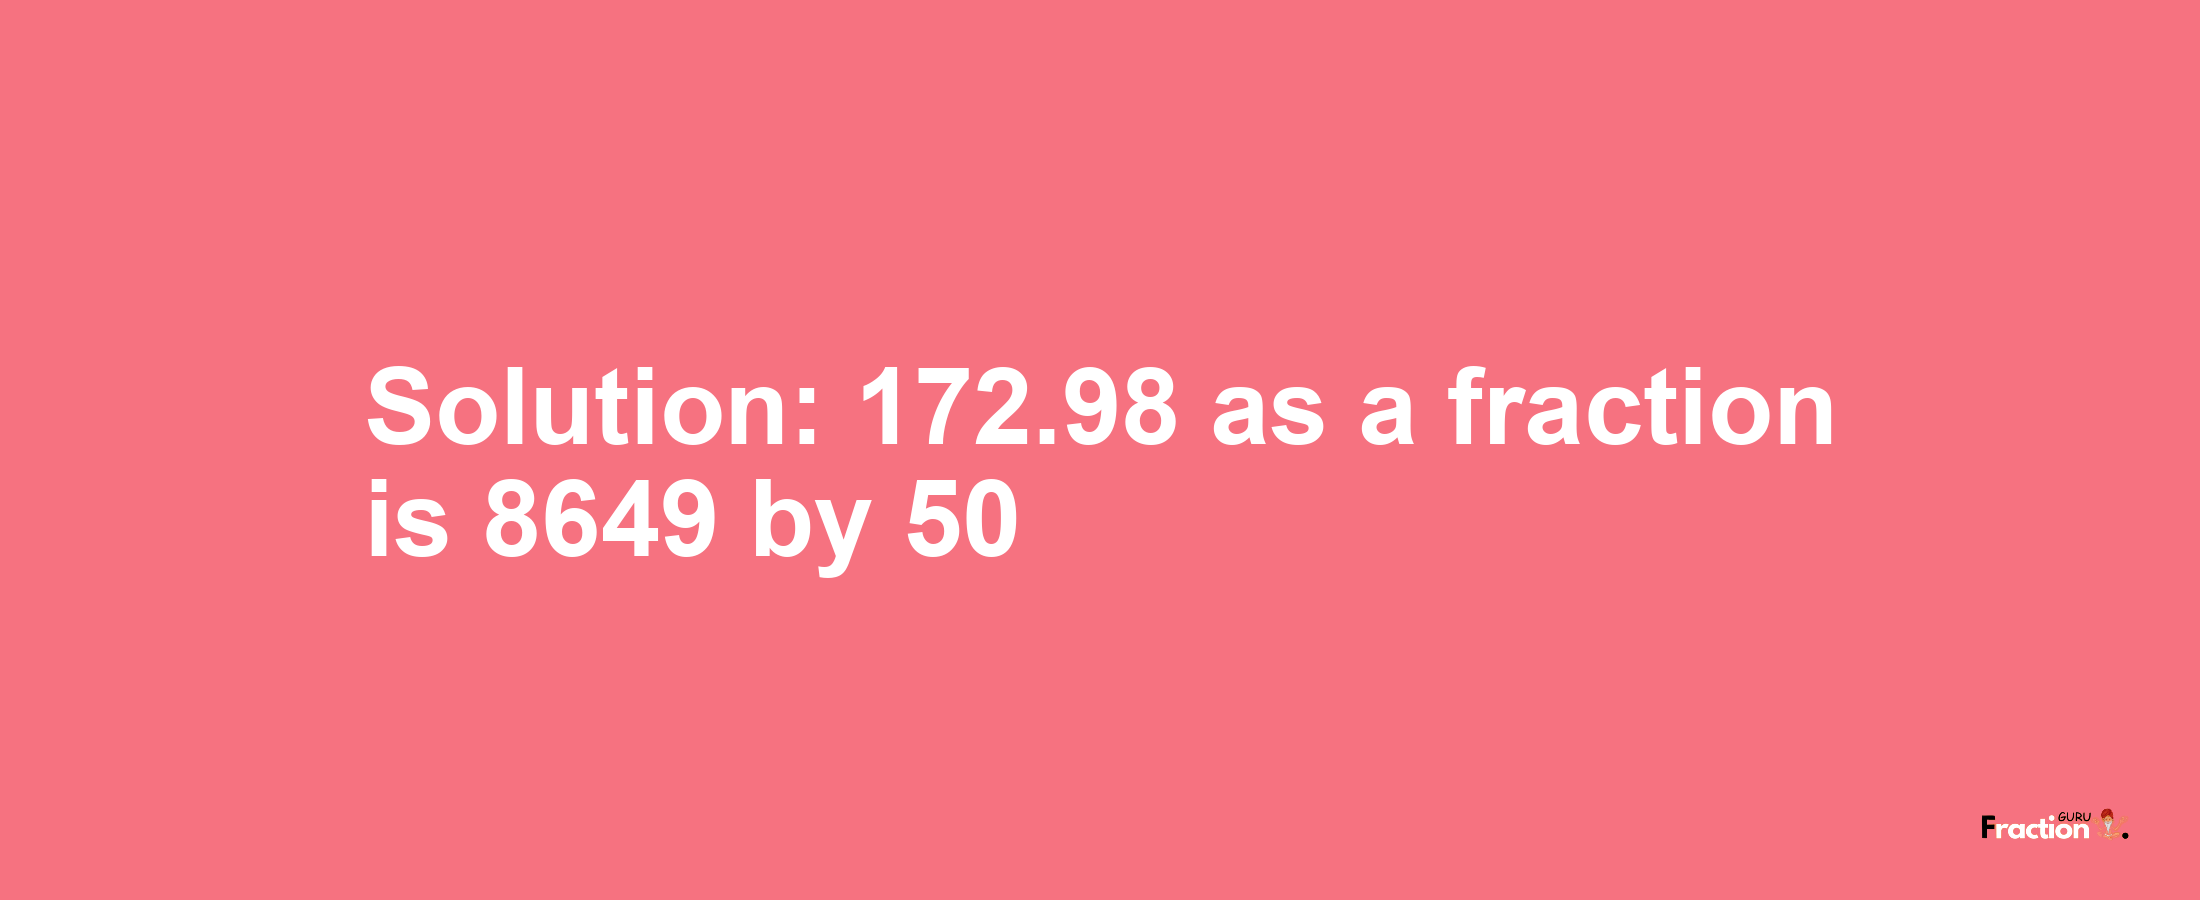 Solution:172.98 as a fraction is 8649/50